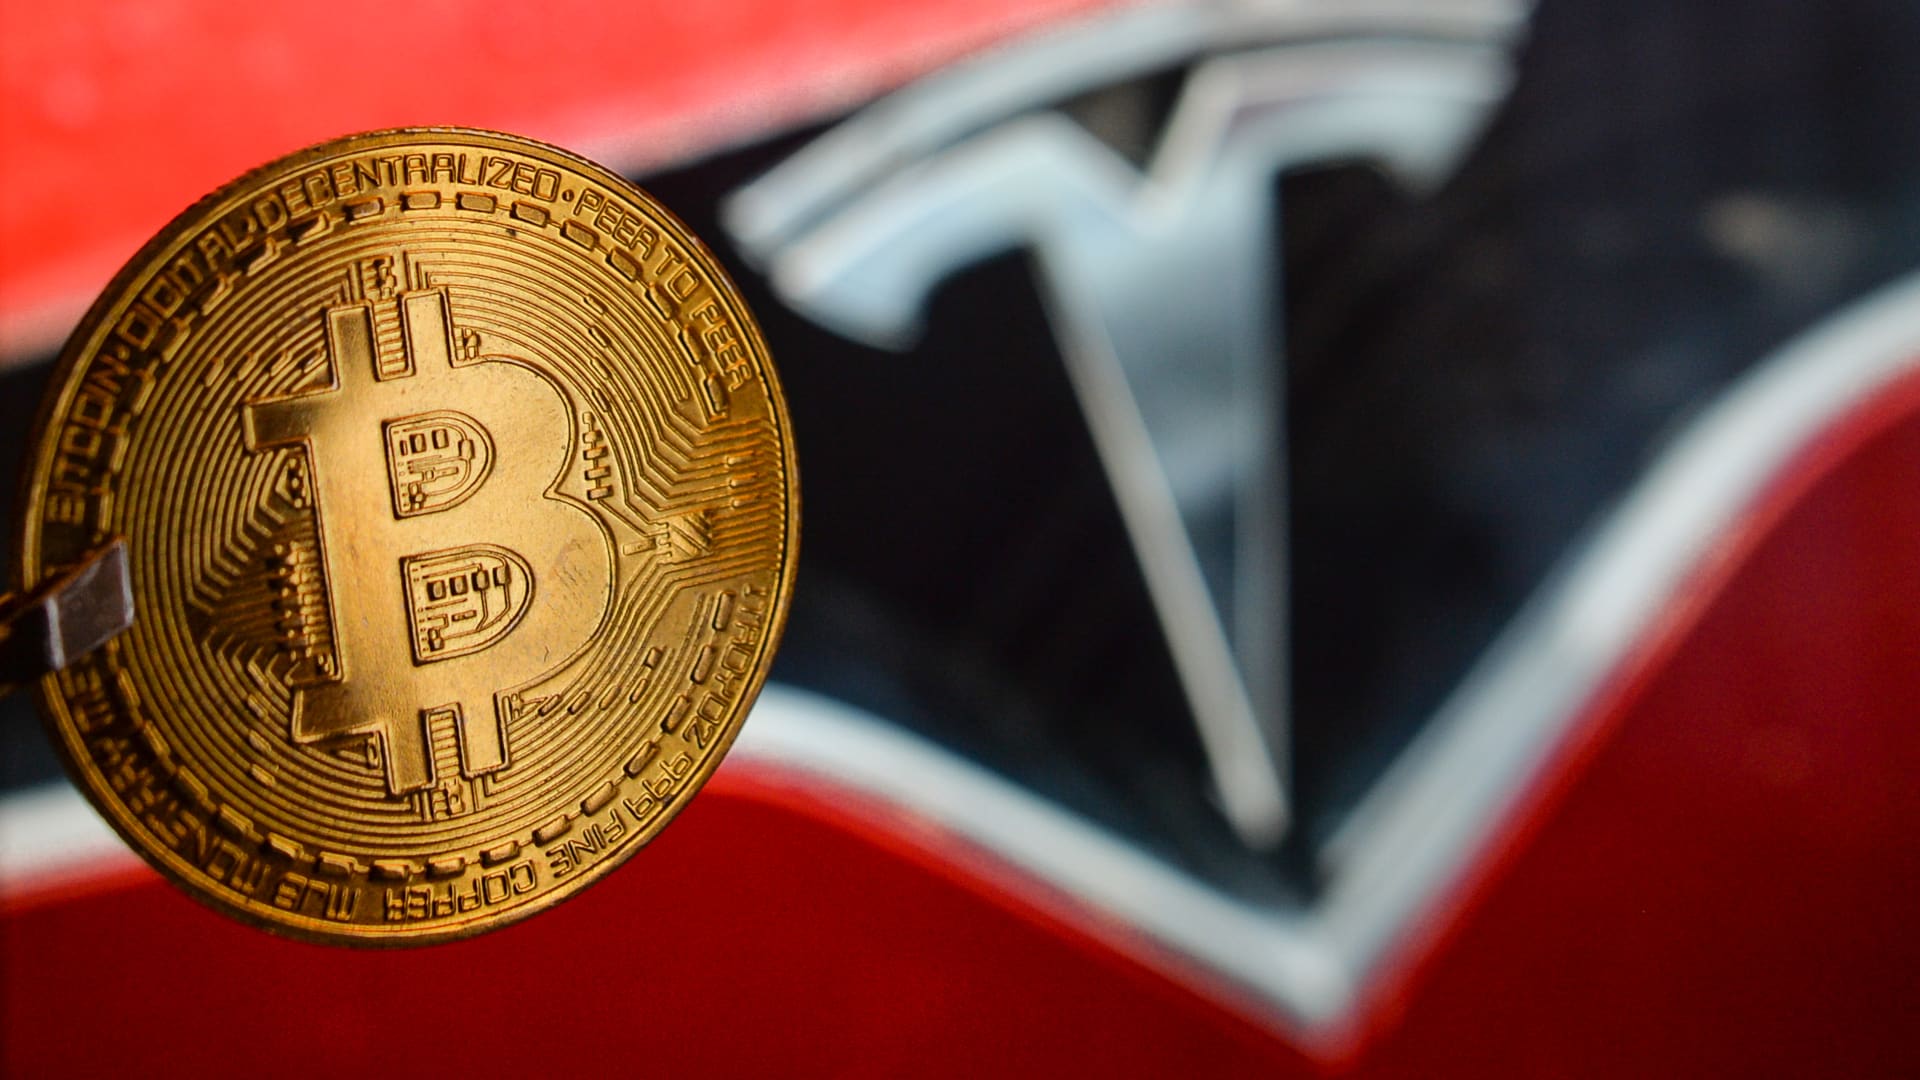 Tesla, led by Elon Musk, confirmed that it purchased about $ 1.5 billion in bitcoin in January and expects to start accepting it as a payment in the future.